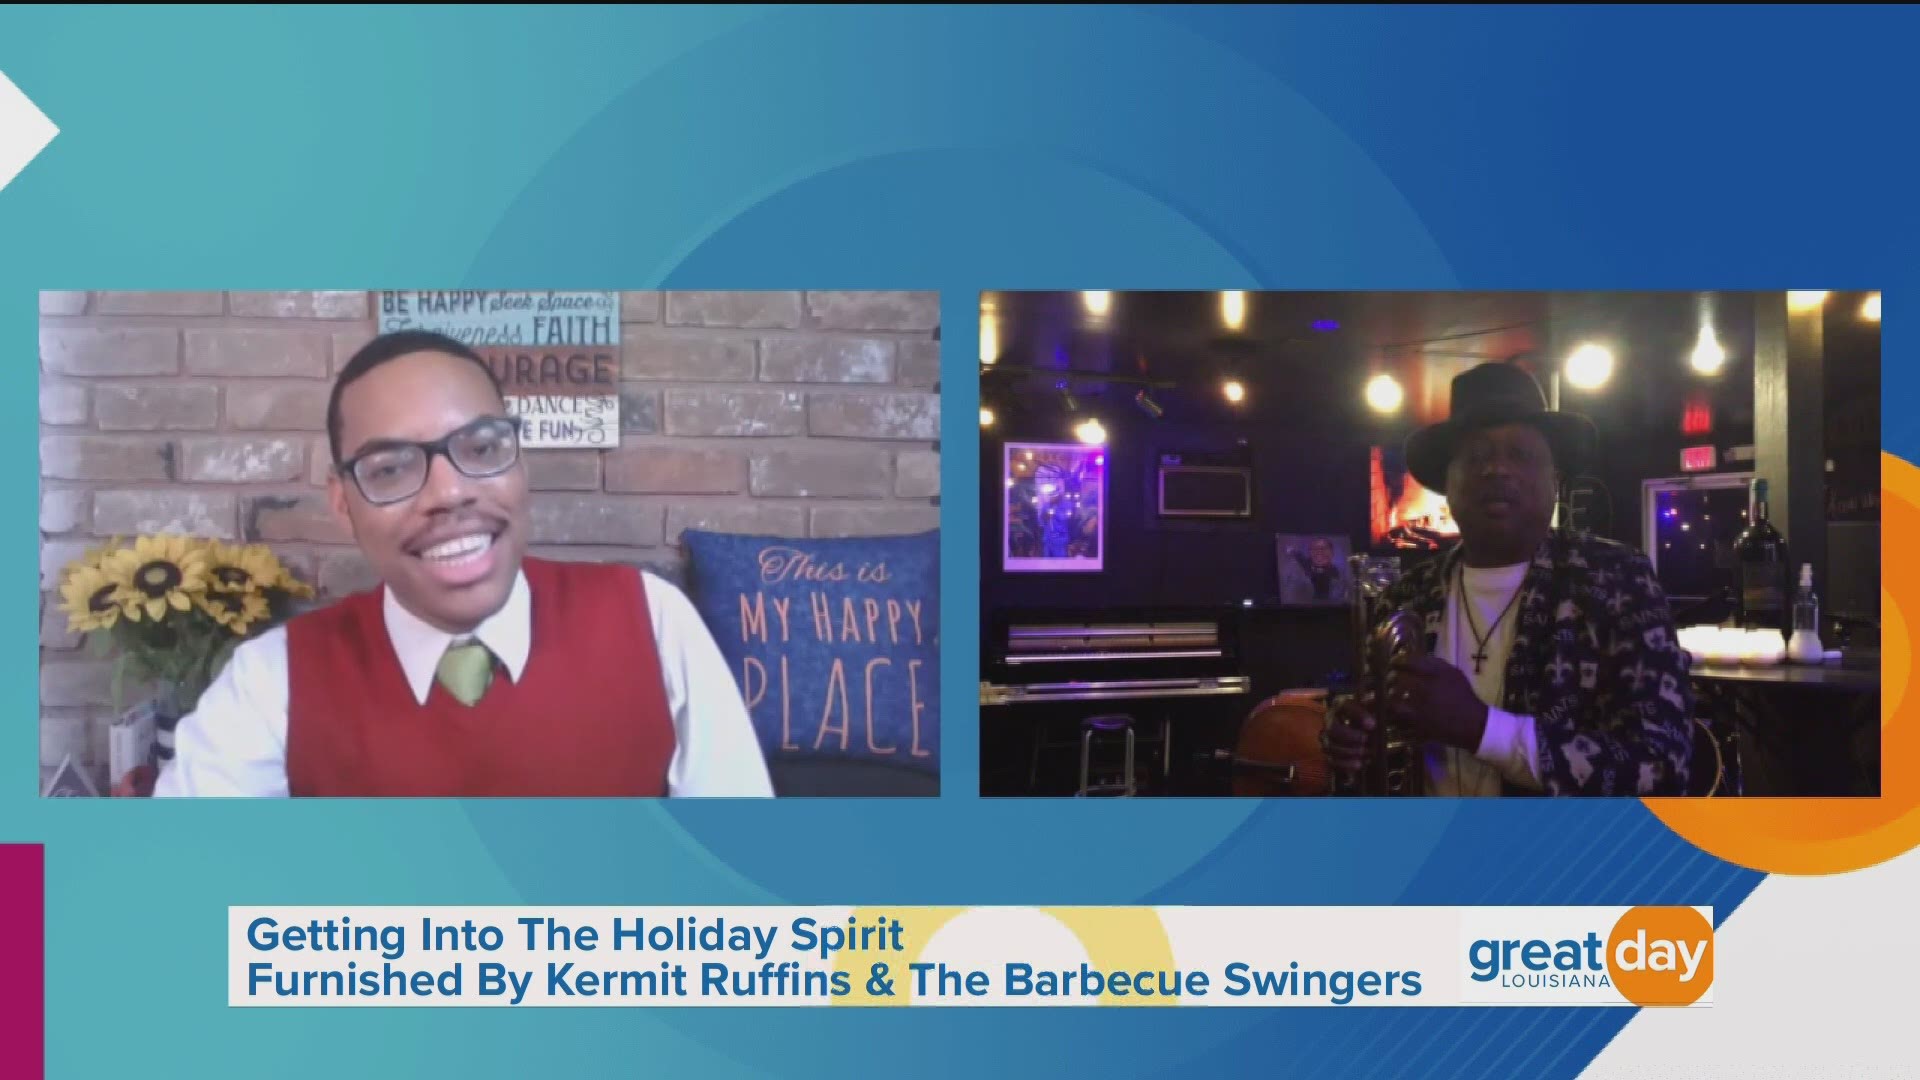 Kermit Ruffins & The Barbecue Swingers performed their holiday song, "A Saints Christmas."